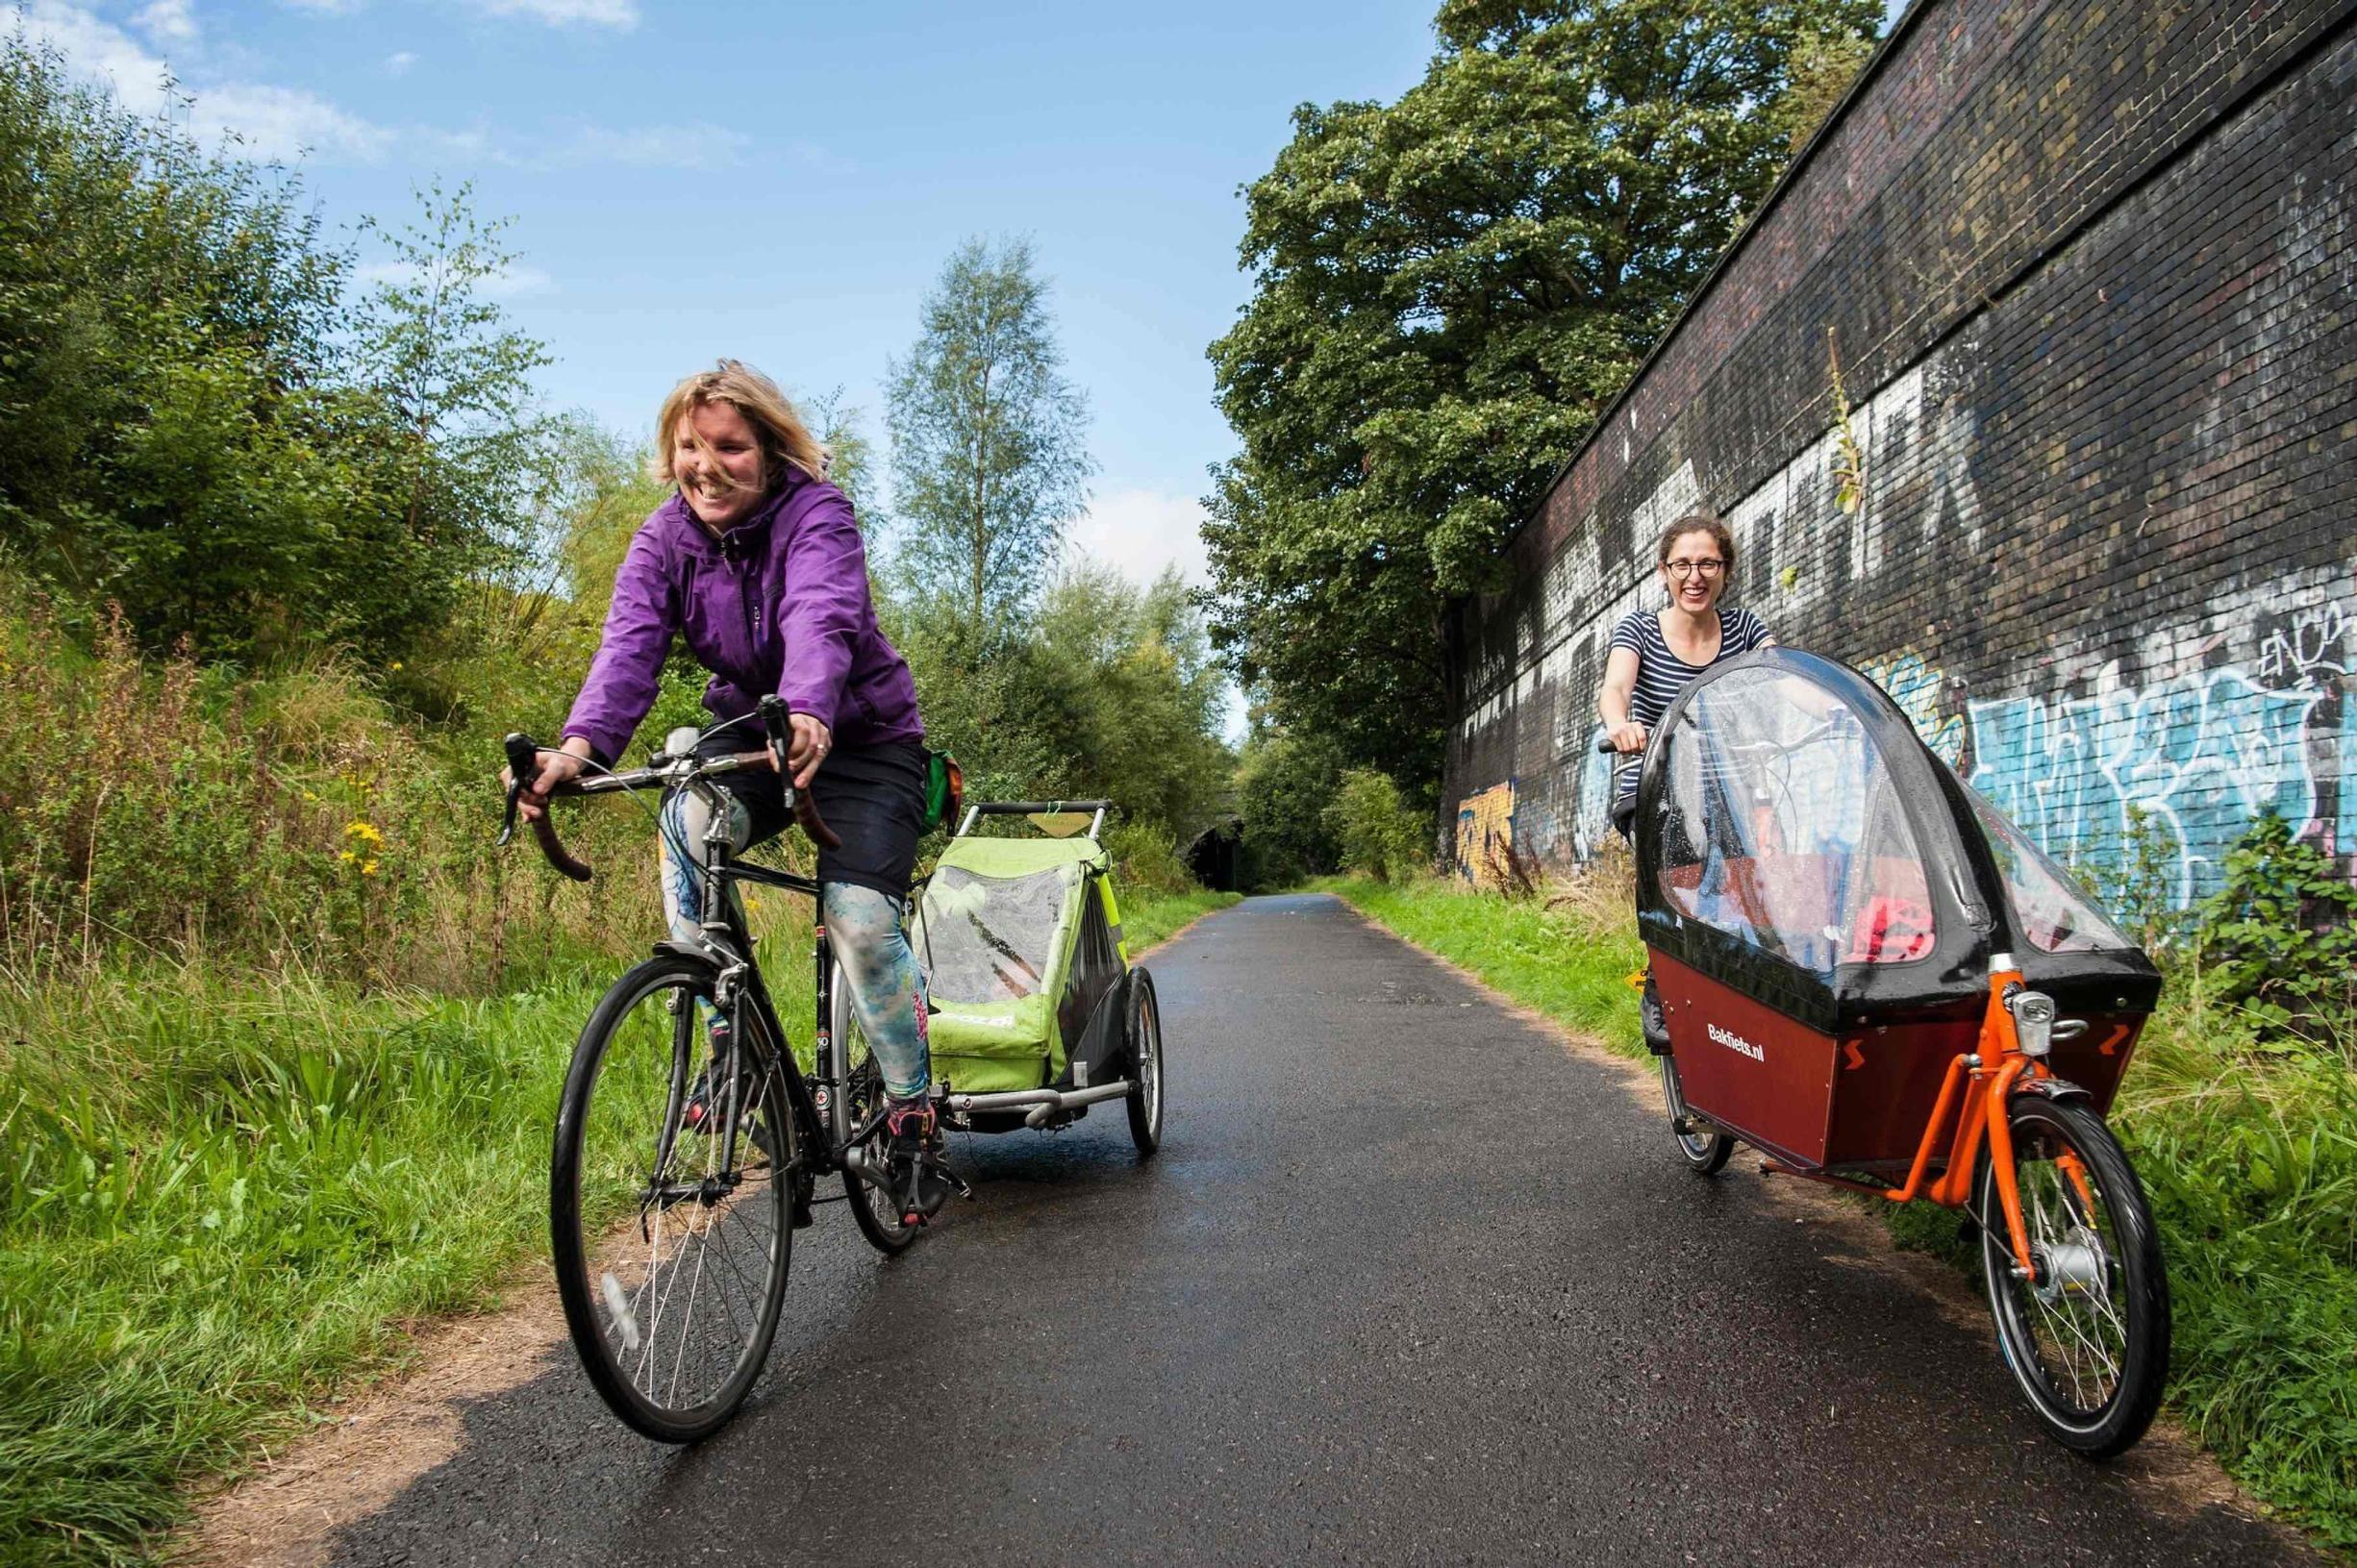 The National Cycle Network: more than 16,000 miles of walking and cycling routes across the UK